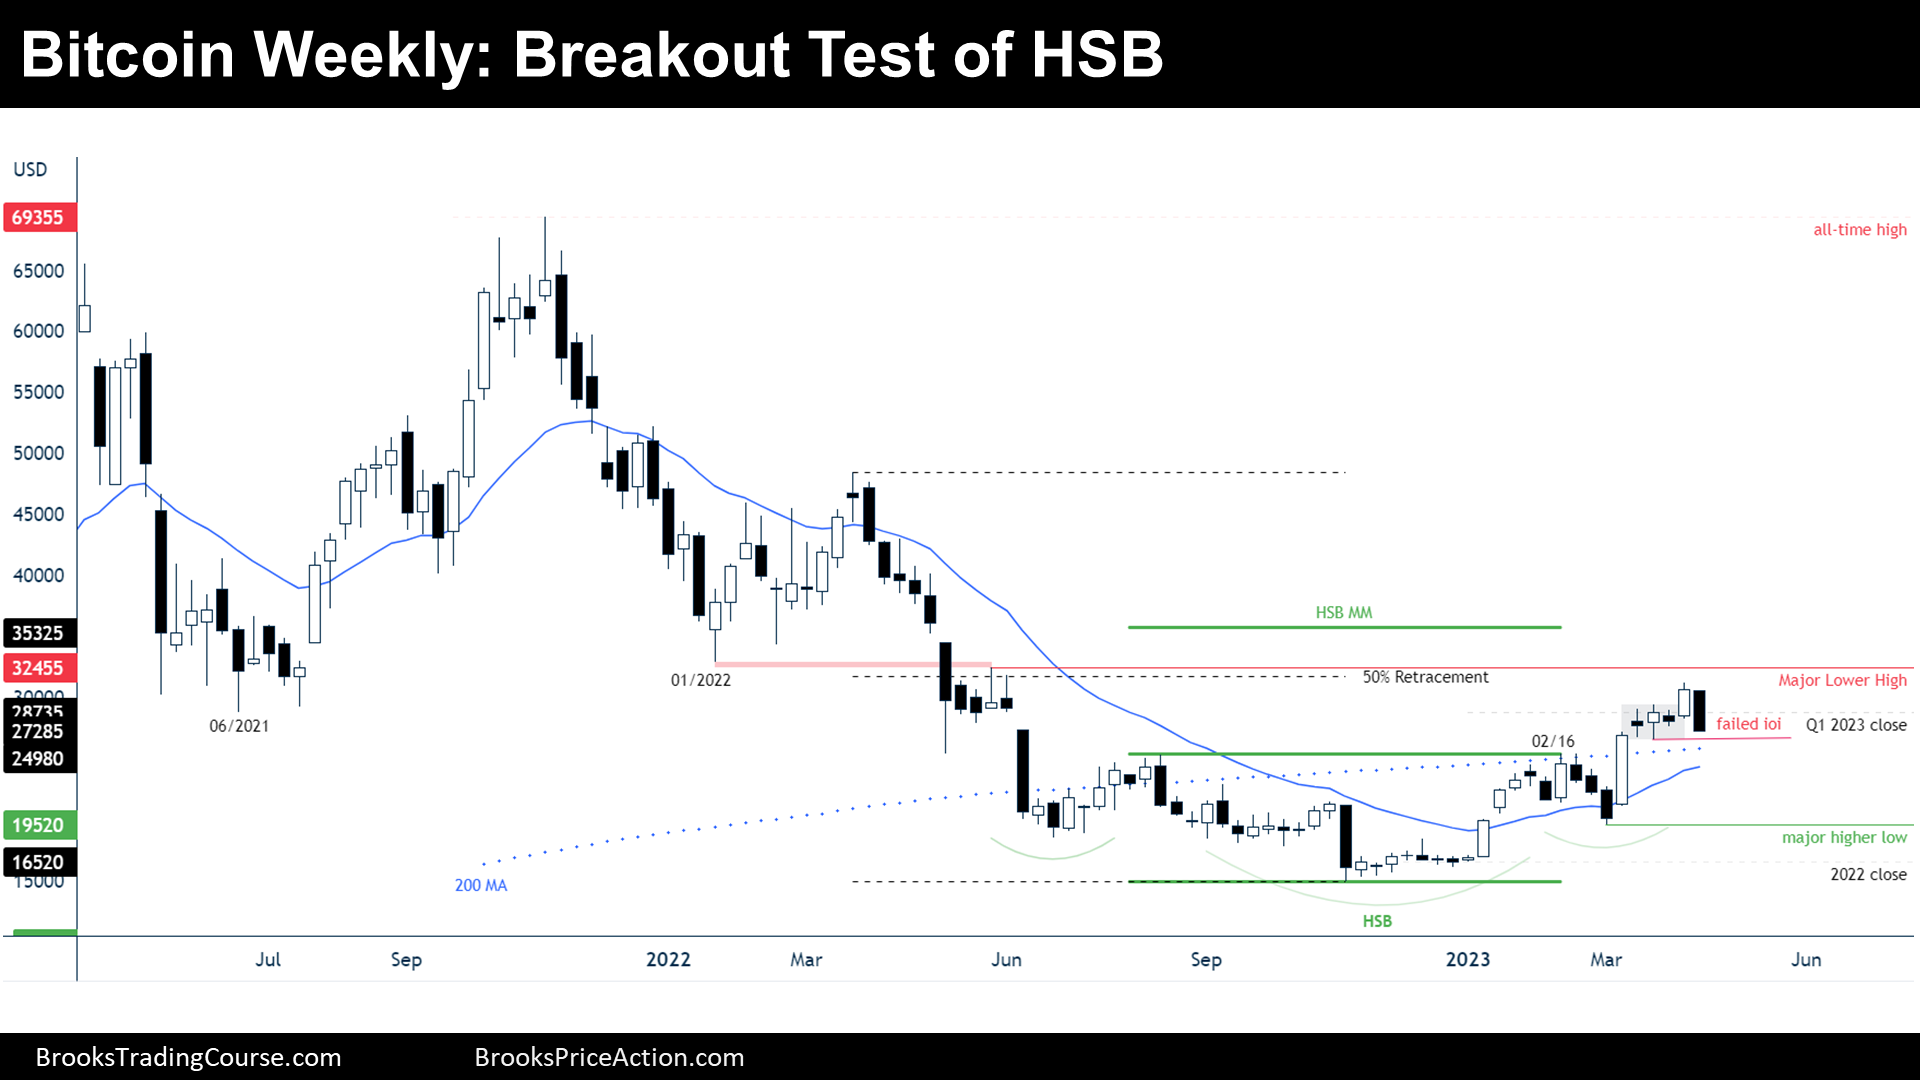 Bitcoin breakout test of HSB on weekly chart